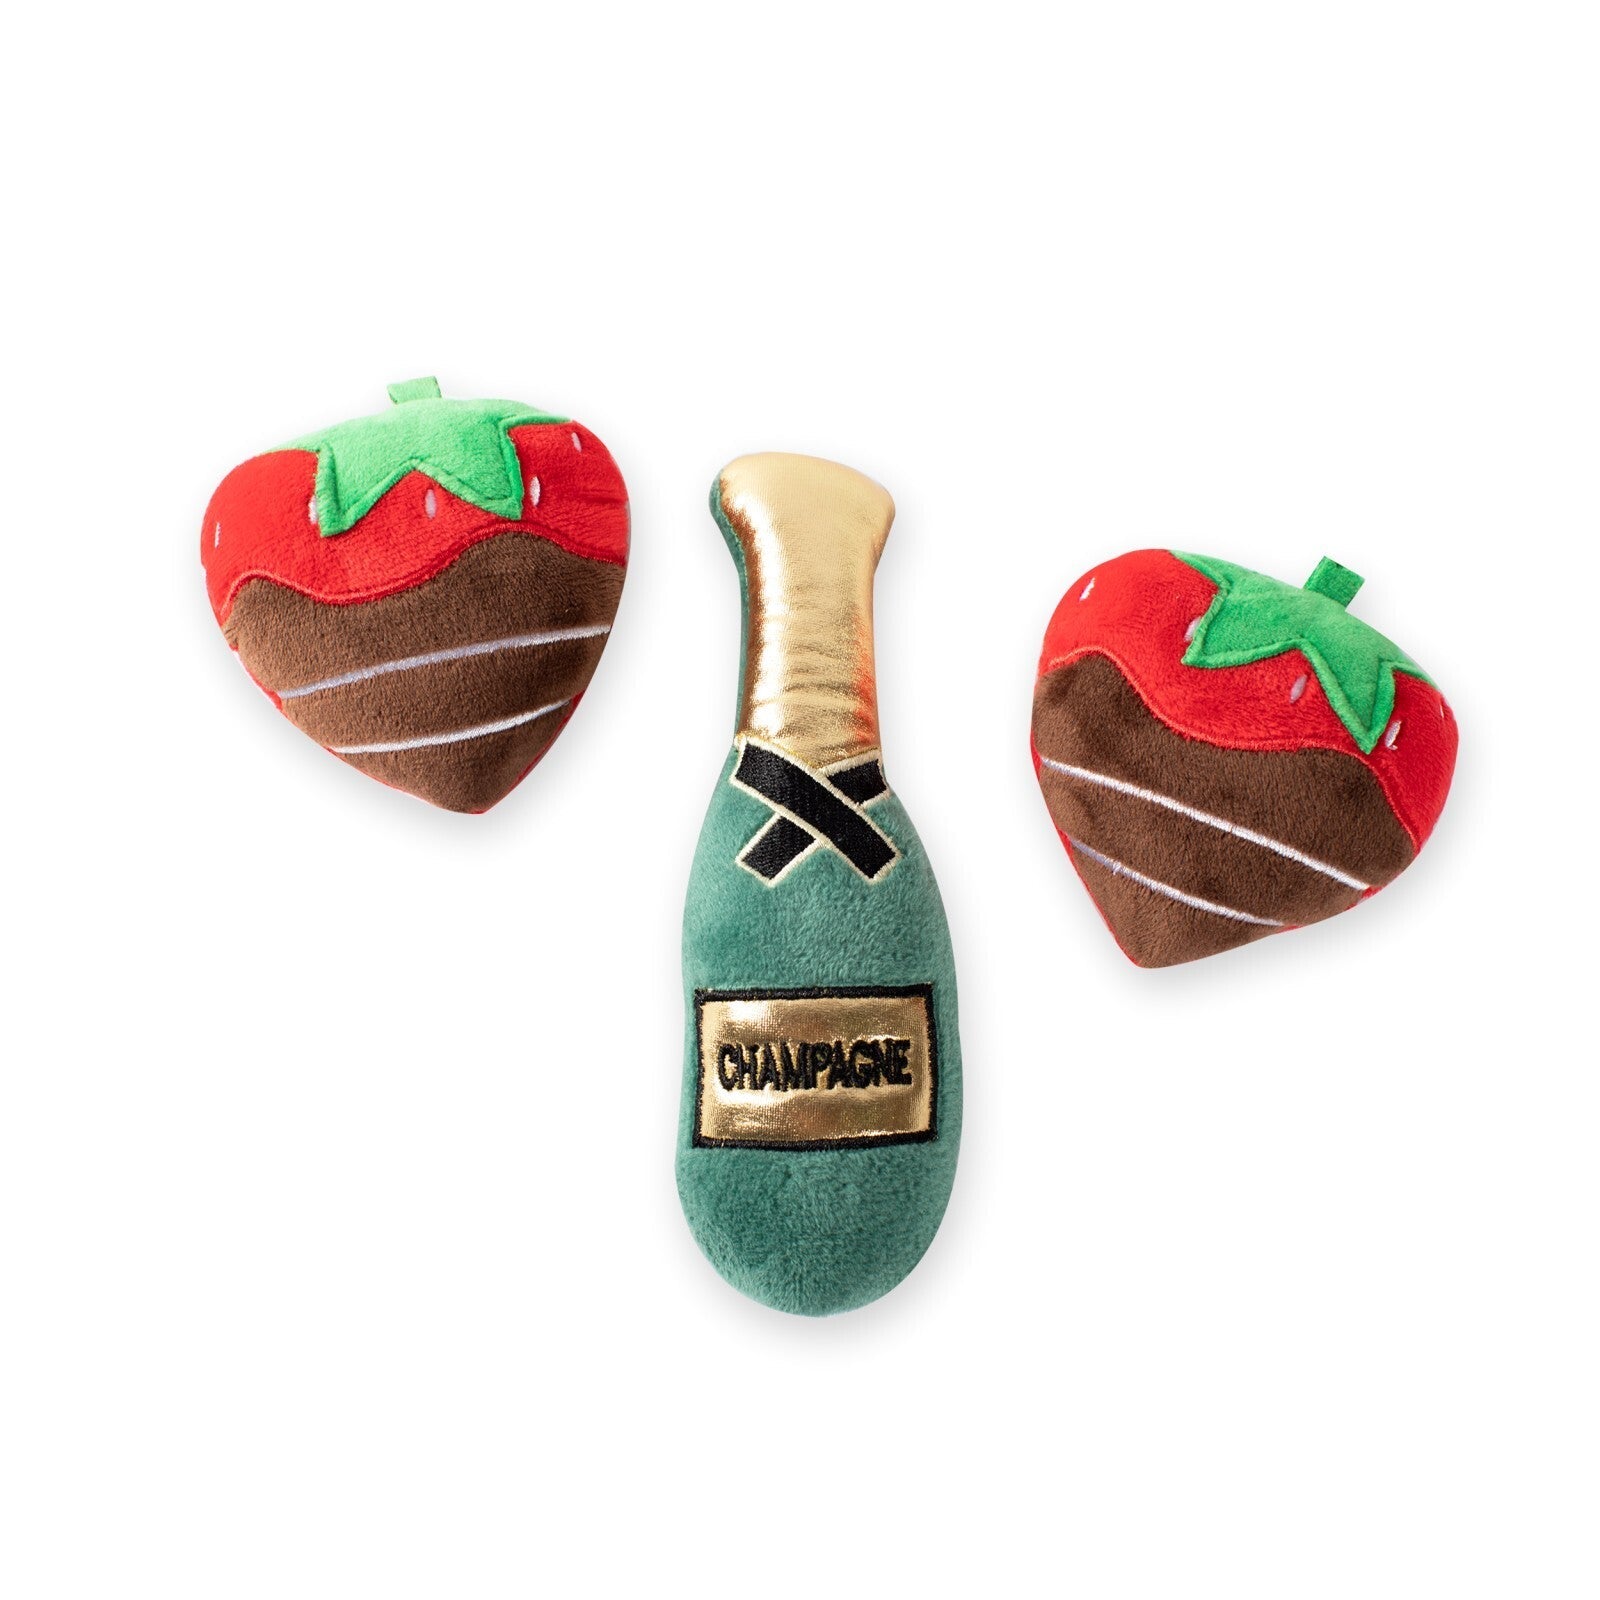 Champagne and Strawberries 3 Piece Small Dog Toy Set - Pooch Luxury